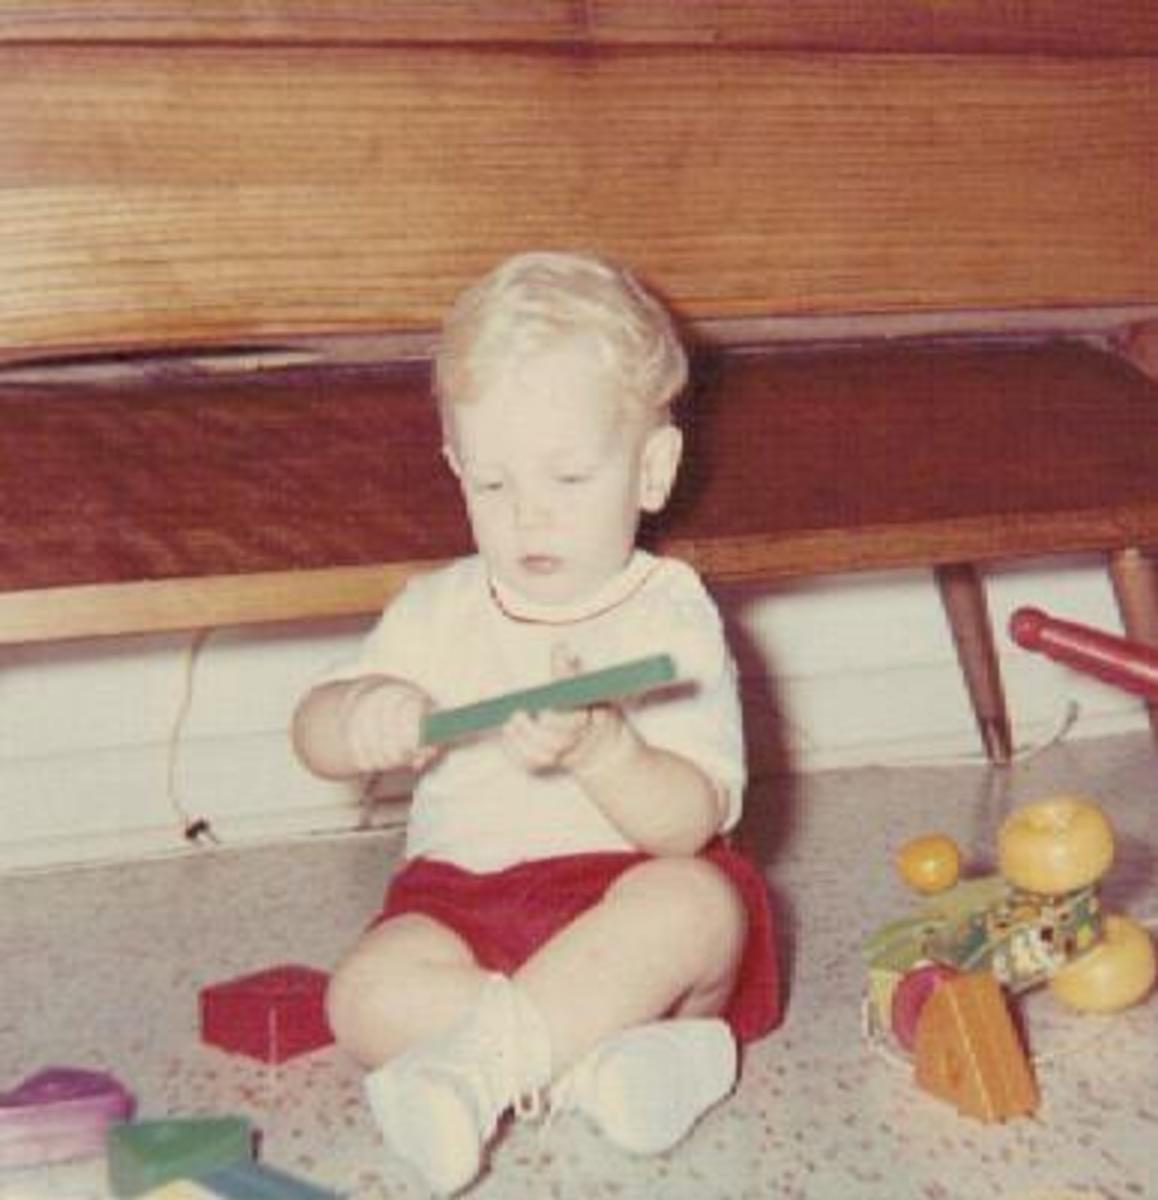 Chris on his first birthday